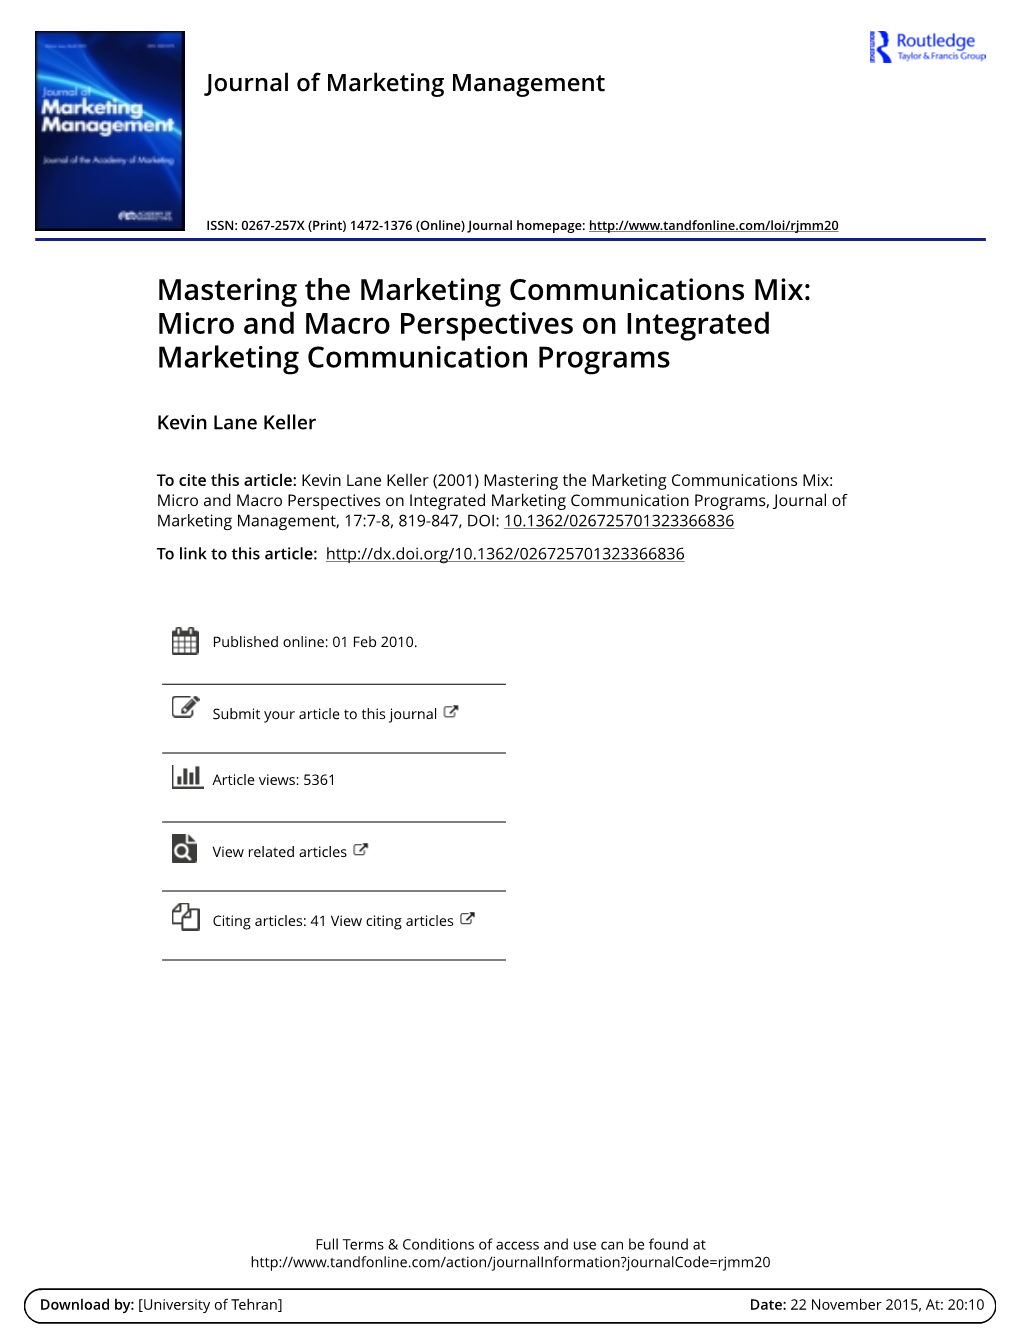 Mastering the Marketing Communications Mix: Micro and Macro Perspectives on Integrated Marketing Communication Programs